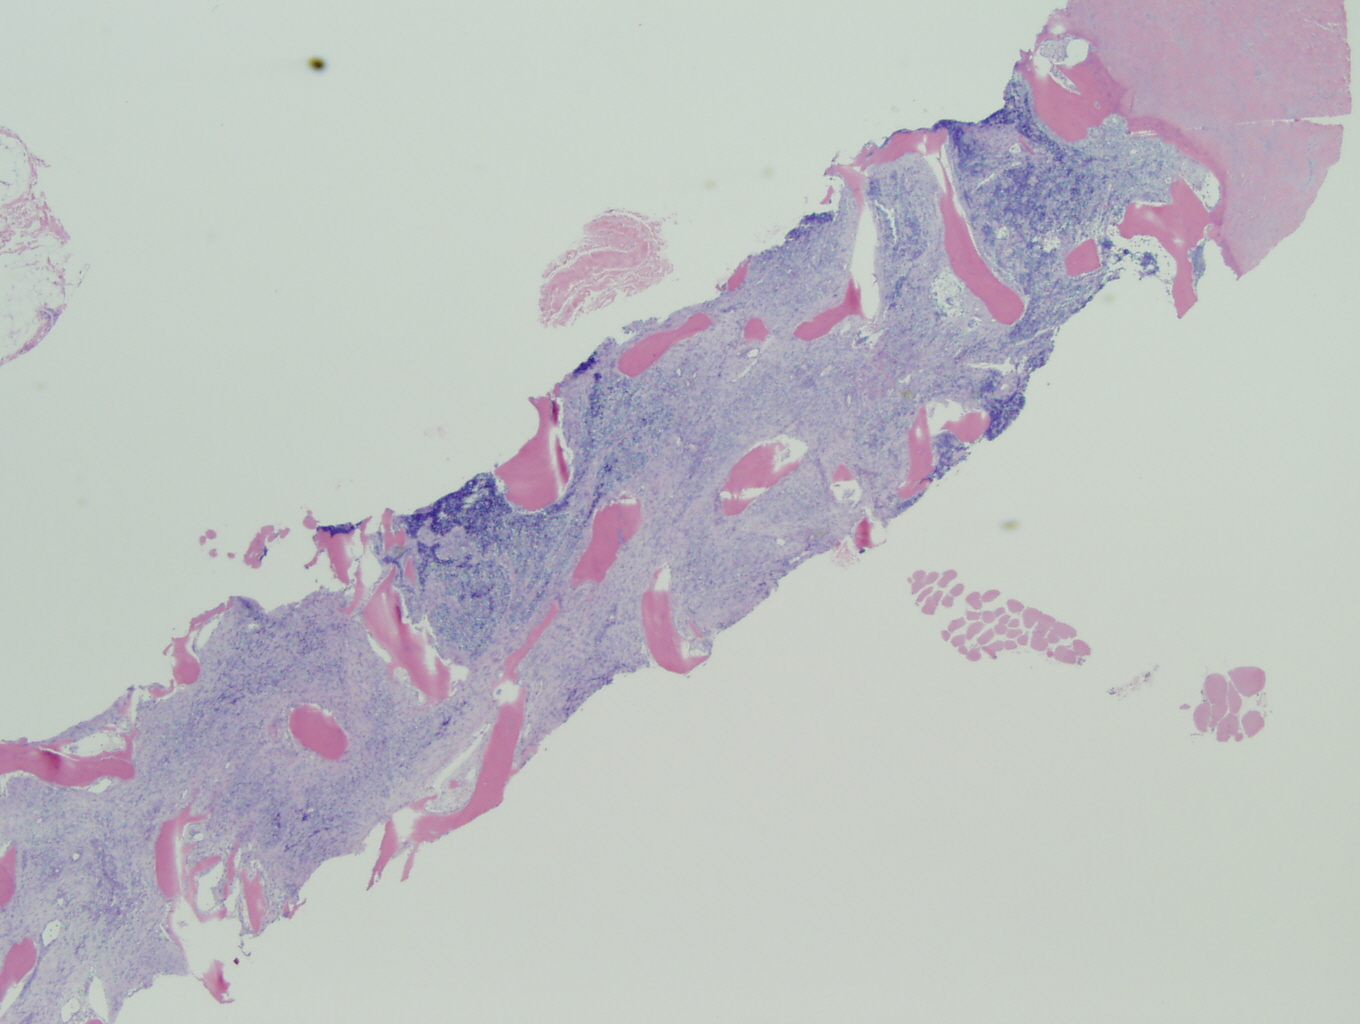 Microscopic image 3 - Biopsy from bone marrow, 2x (Click to enlarge)